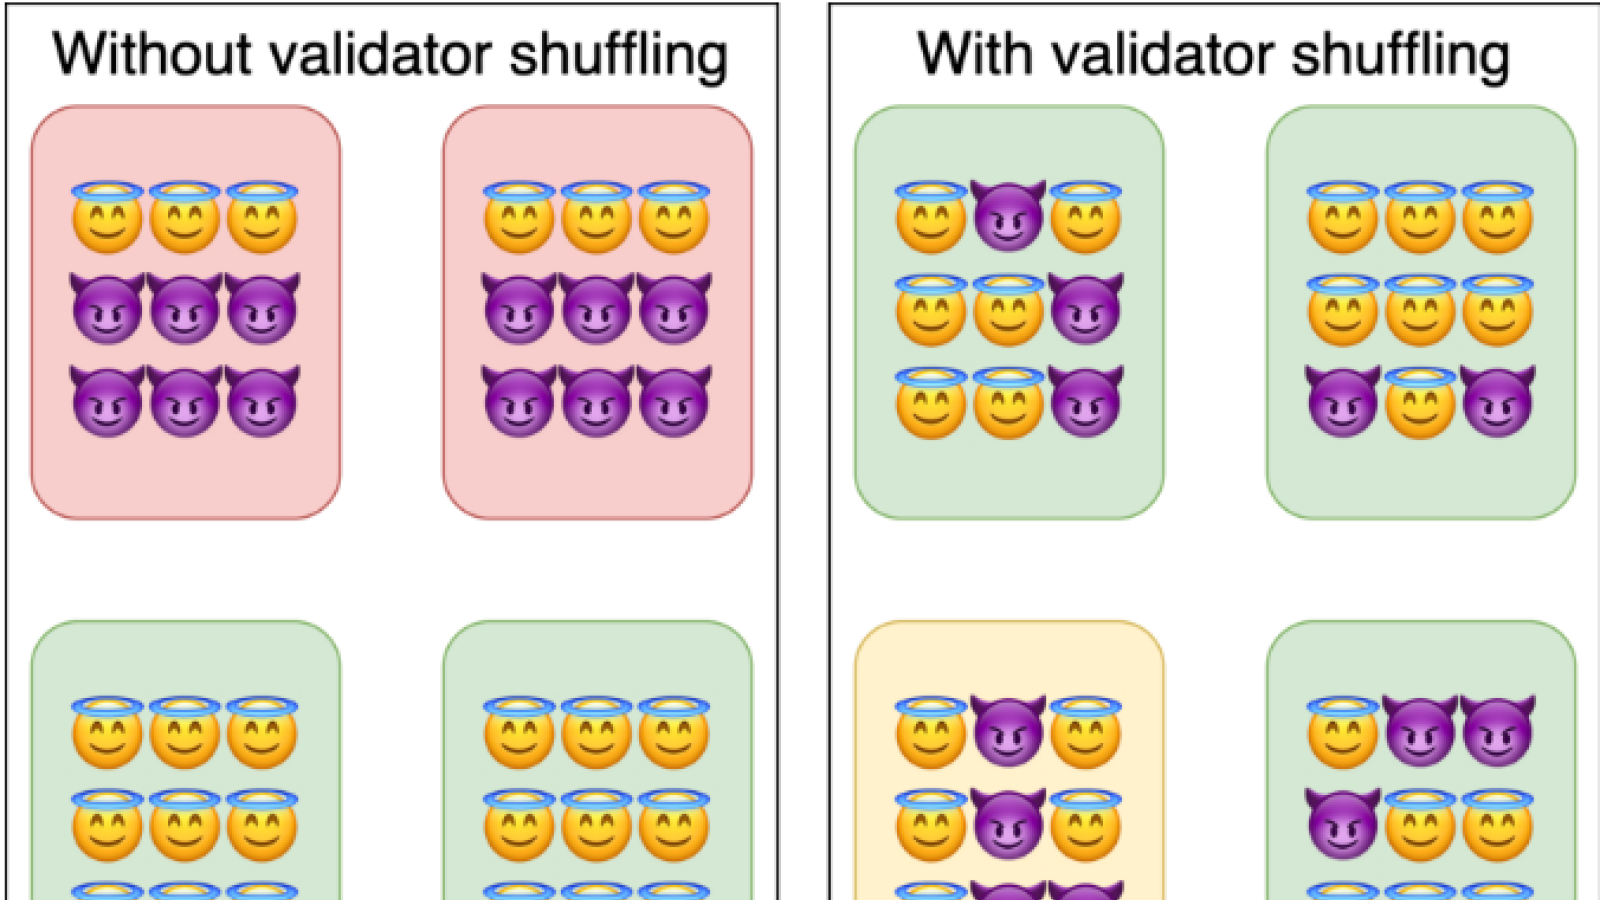 Validator shuffling protects network from corruption